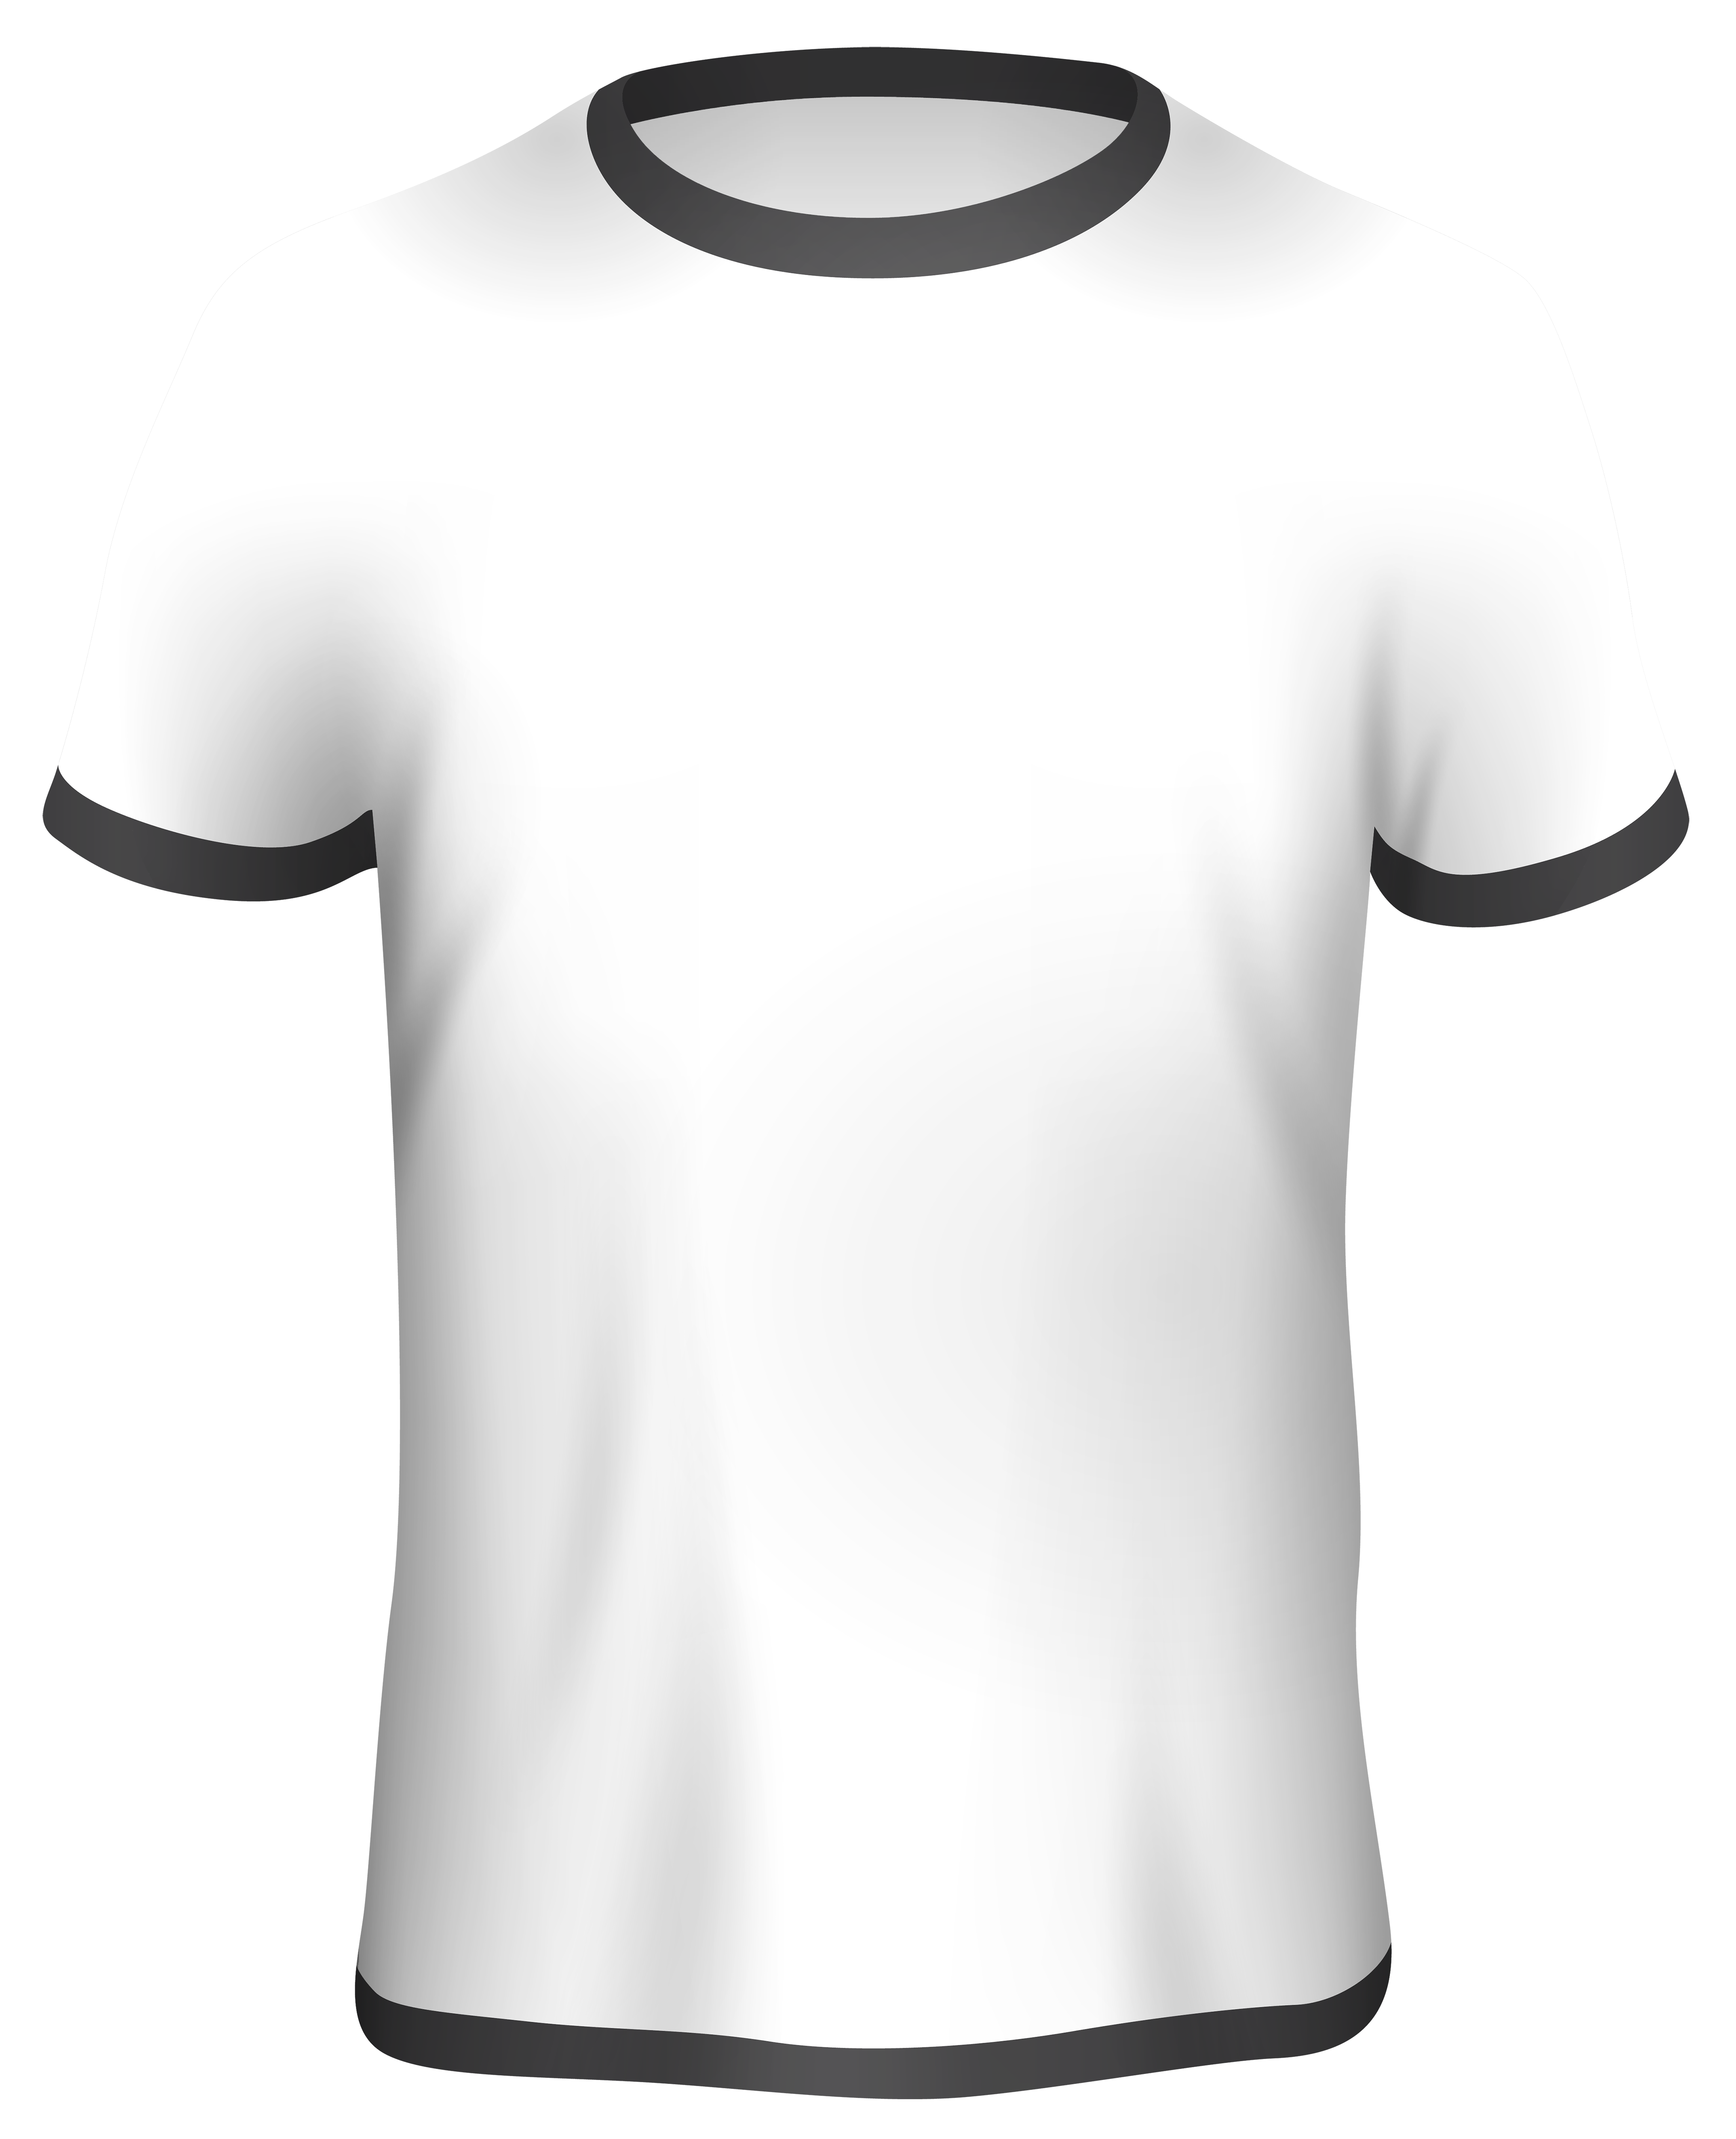 Download Male White Shirt PNG Clipart - Best WEB Clipart